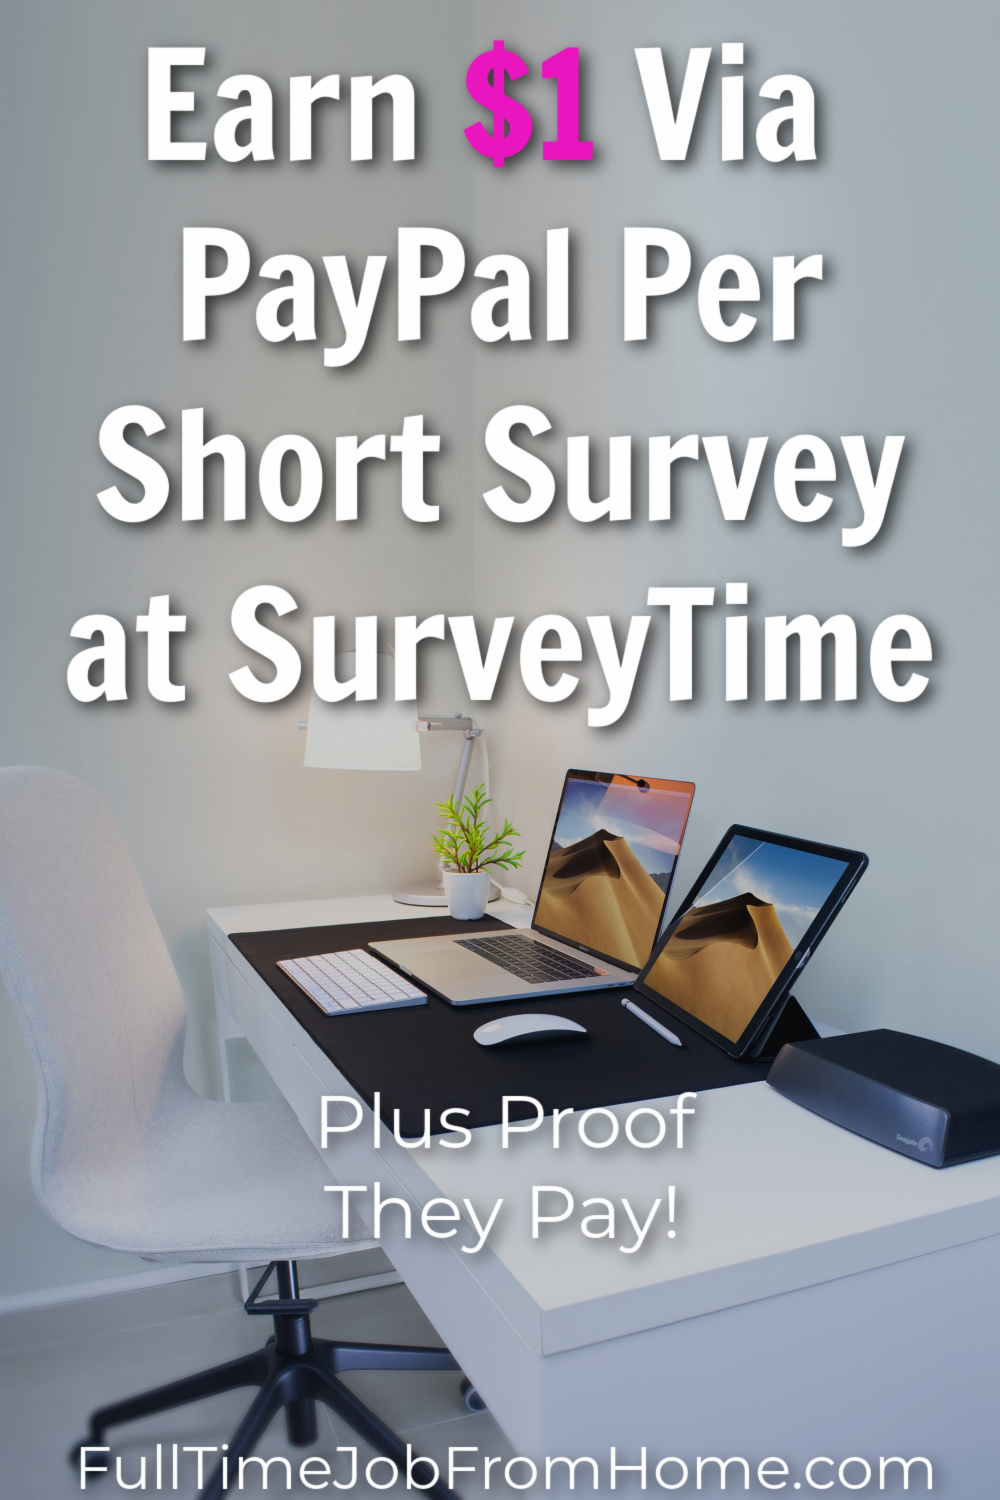 Learn How You Can Earn $1 Straight To Your PayPal Account By Taking Short Surveys at SurveyTime